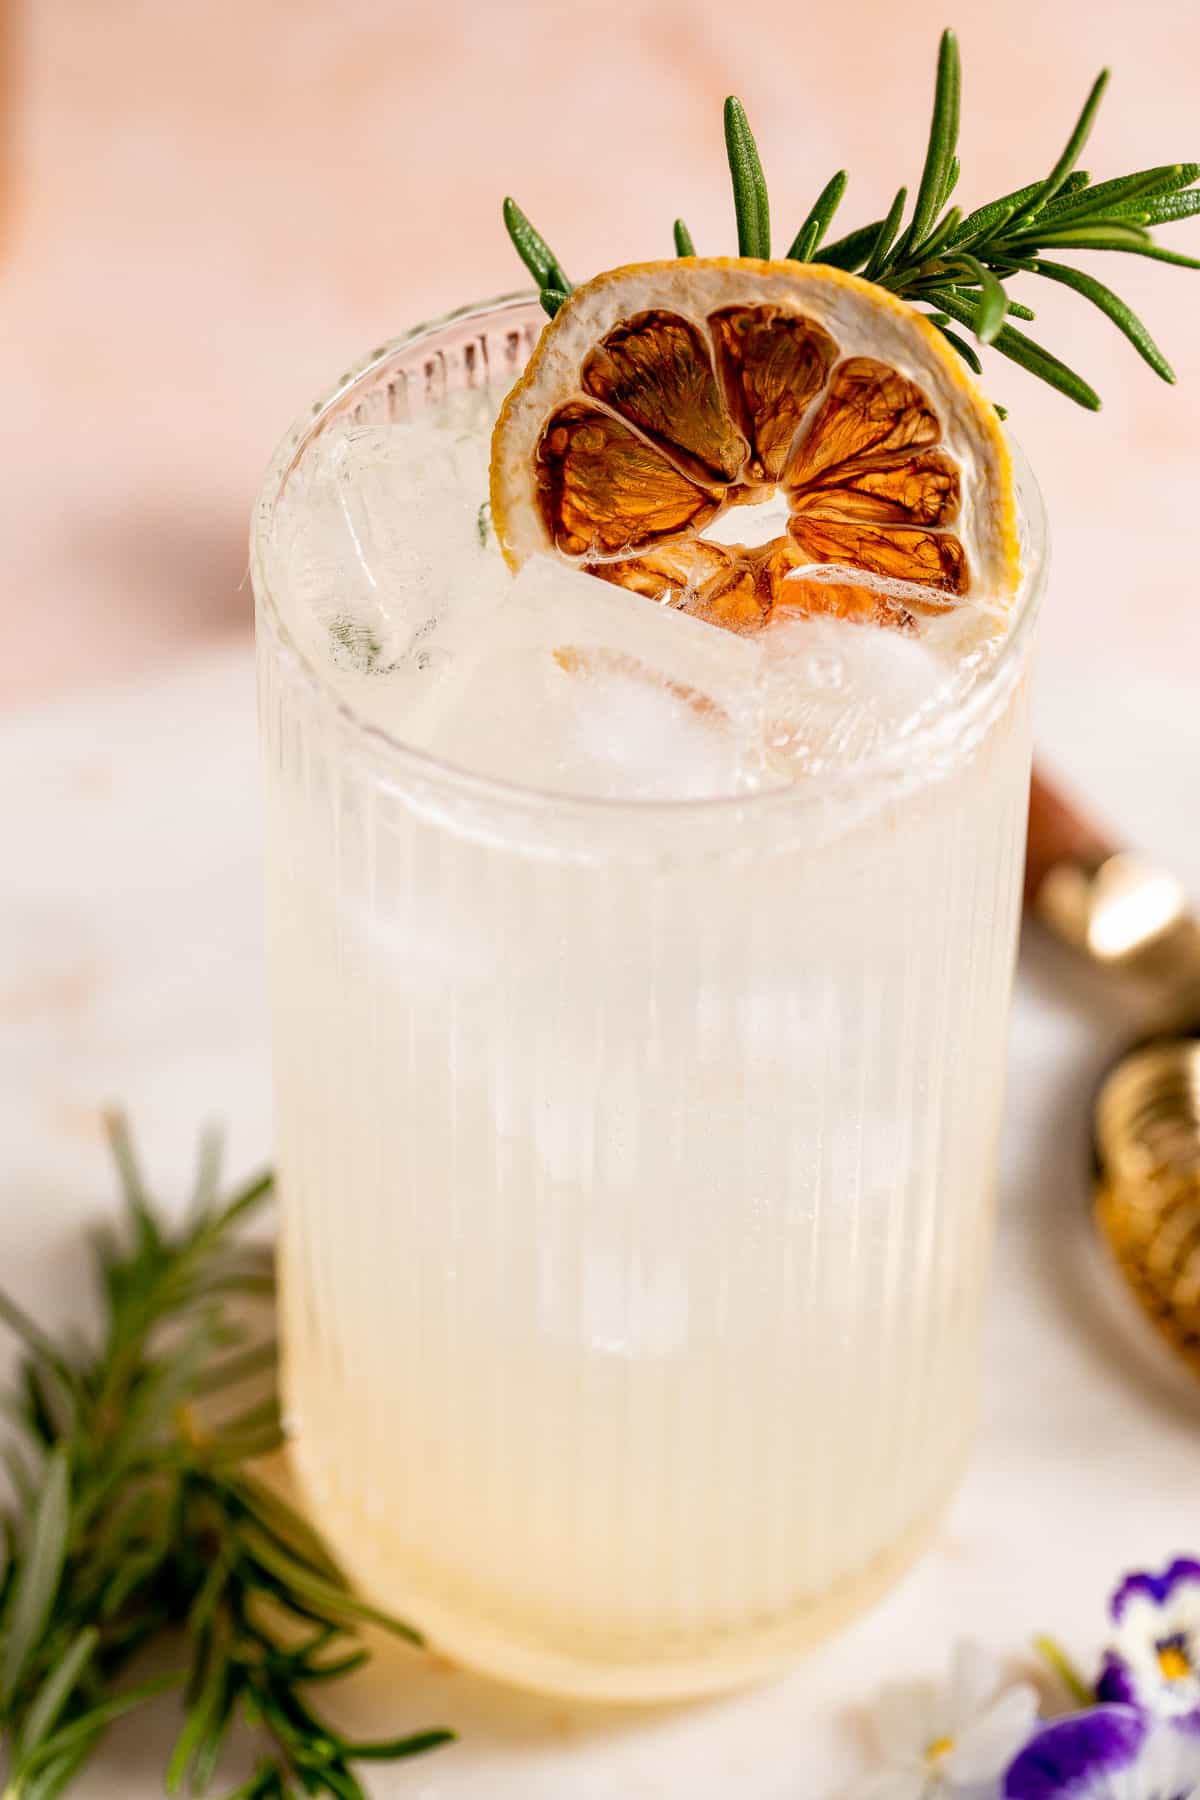 A Vodka Collins cocktail in a serving glass garnished with an orange slice and fresh herbs.